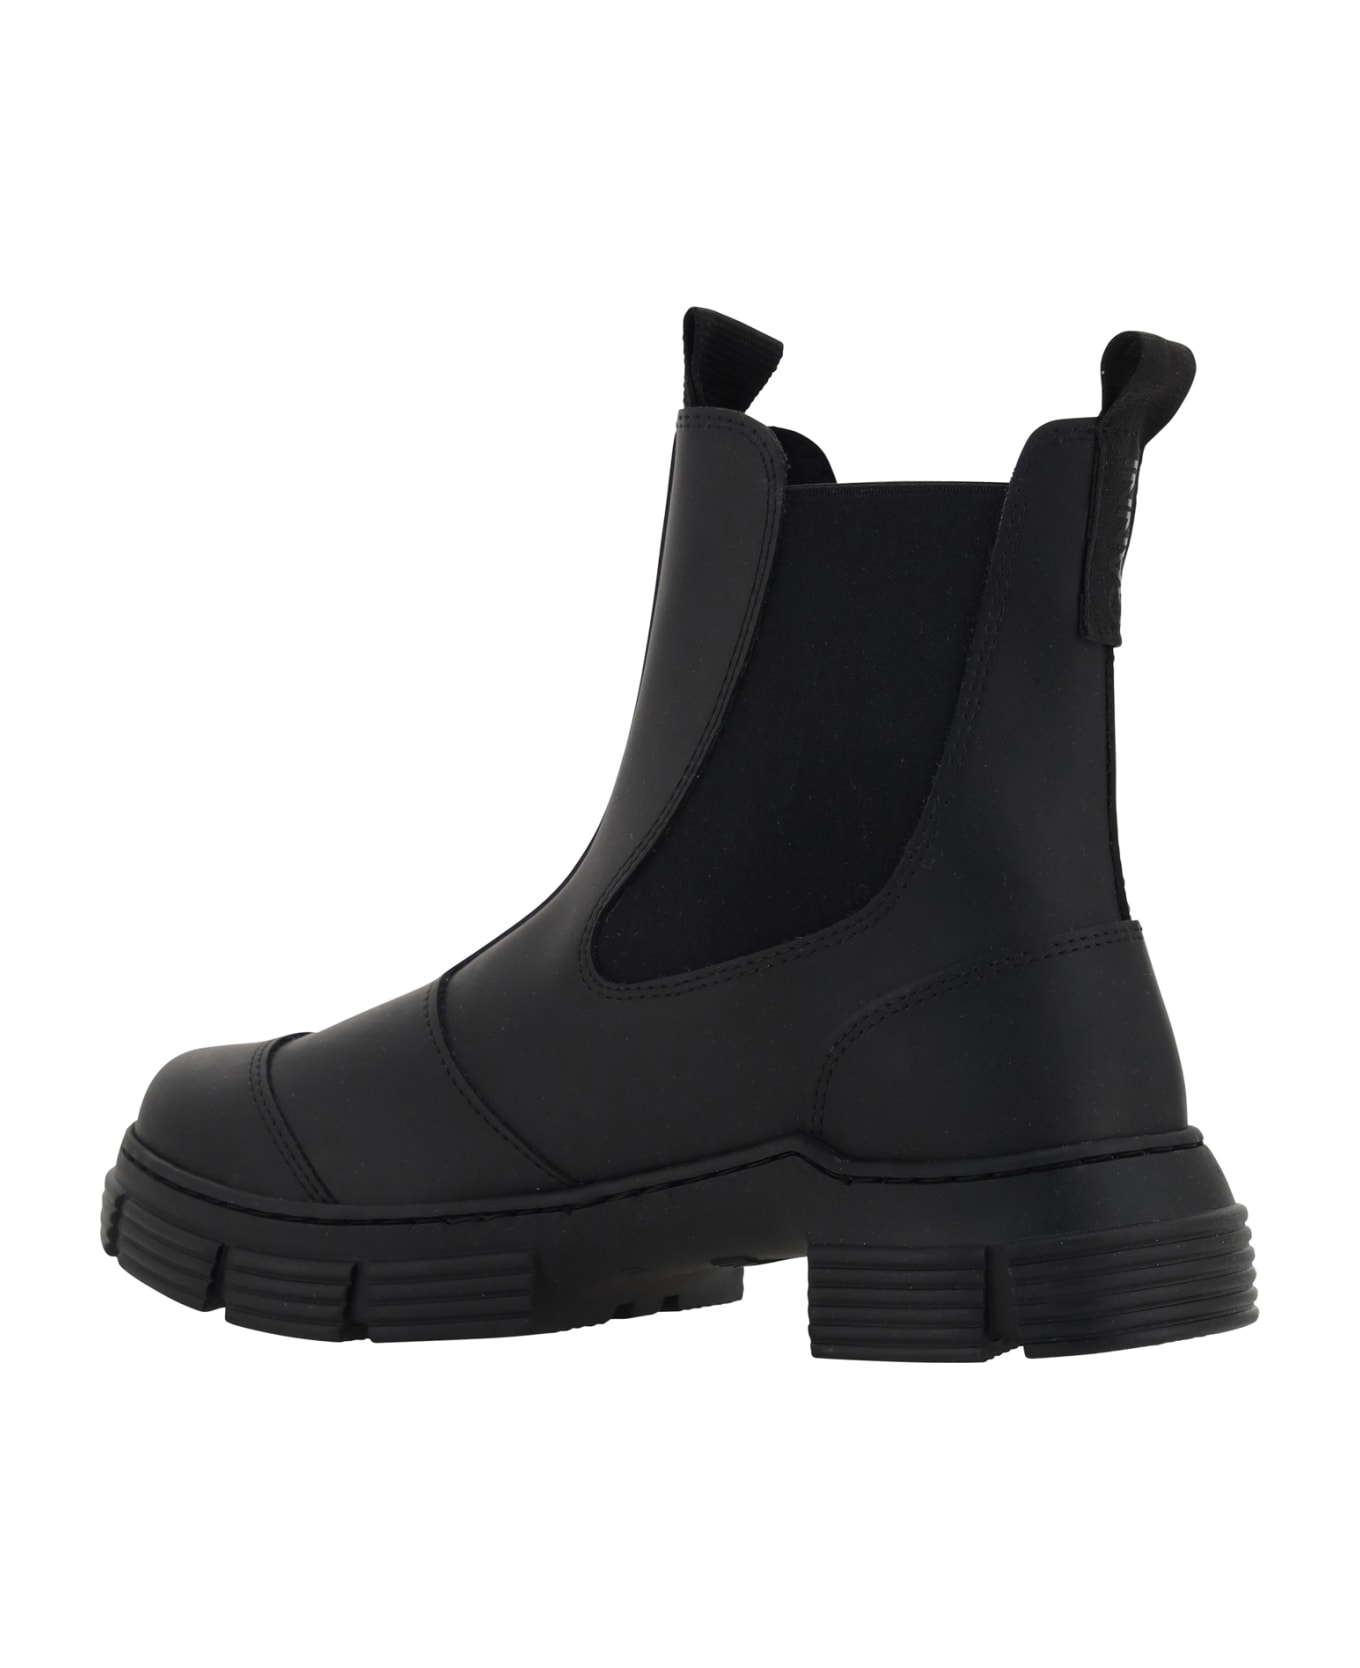 Ganni Rubber City Ankle Boots - Black ブーツ